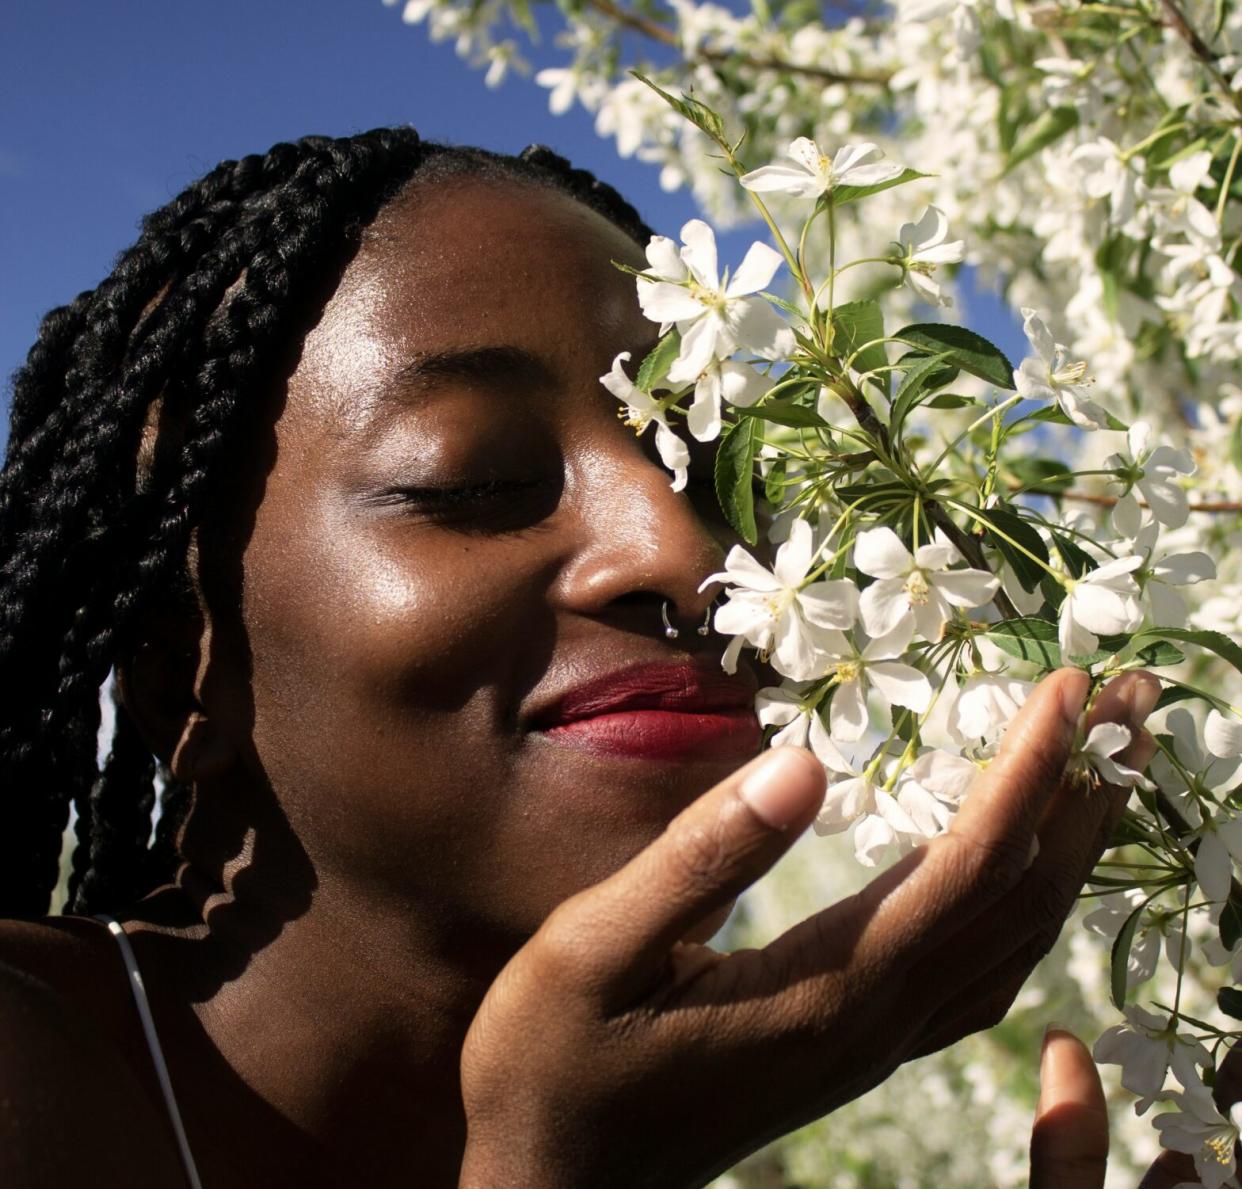 a Black woman smelling bloomed flowers on a bright sunny day